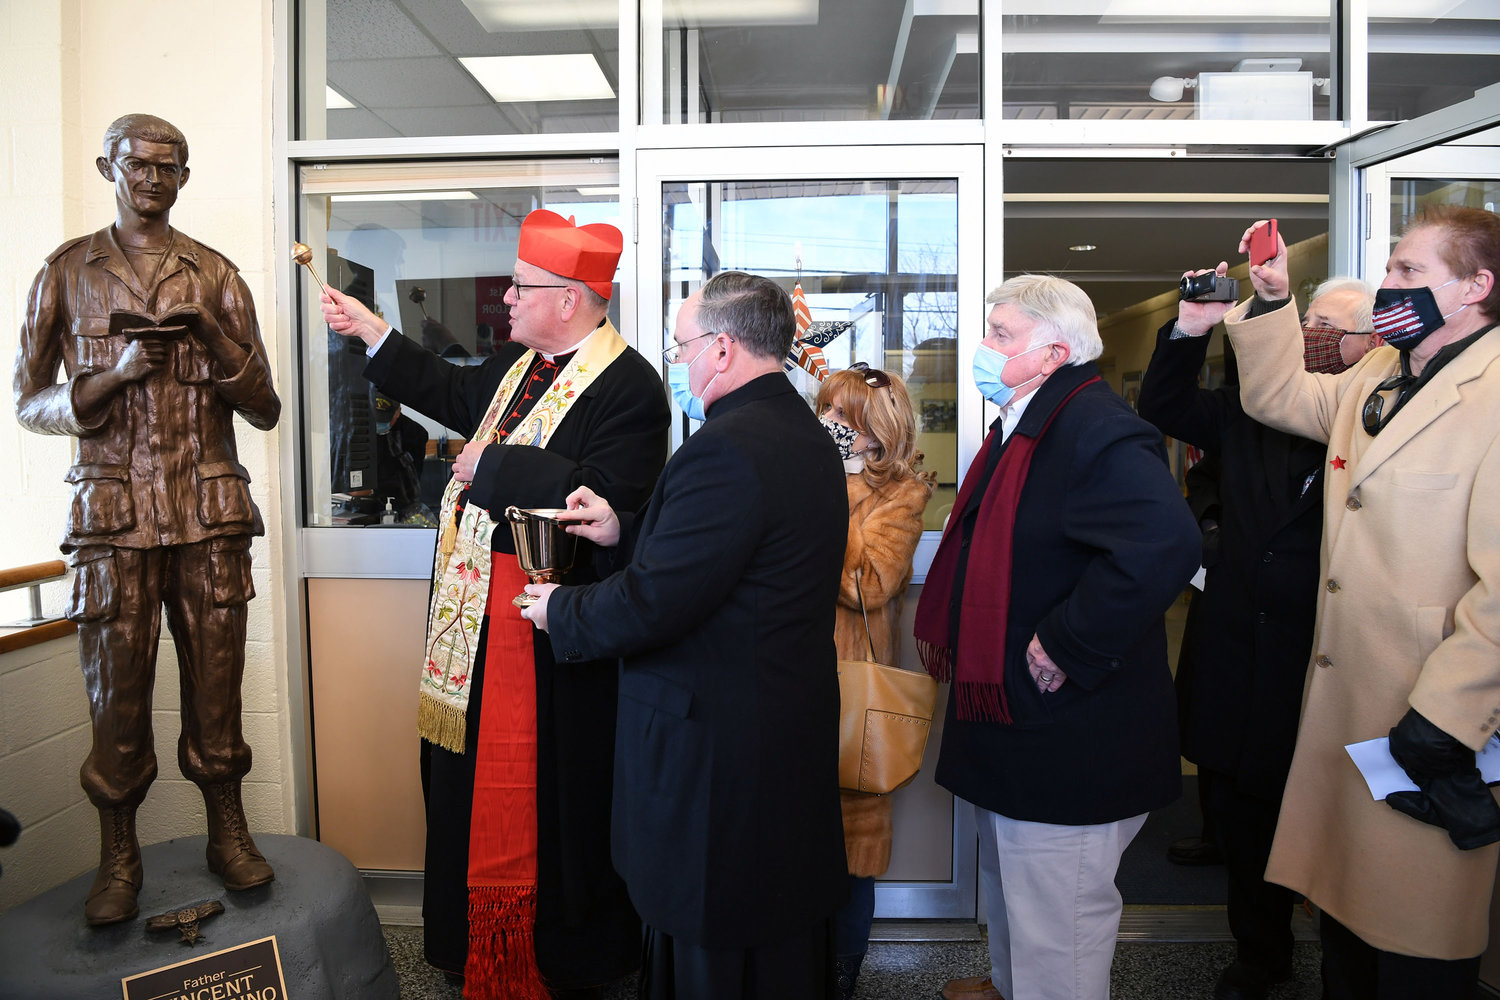 Cardinal Dolan blesses a statue of Father Vincent Capodanno, M.M., in the lobby of Father Vincent Capodanno Catholic Academy on Staten Island Jan. 21. Cardinal Dolan, who dedicated the academy in the same ceremony, is assisted by Father Michael Martine, pastor of Holy Rosary parish on Staten Island. The academy opened in September after the merger of Holy Rosary and St. Adalbert schools for the 2020-2021 school year.